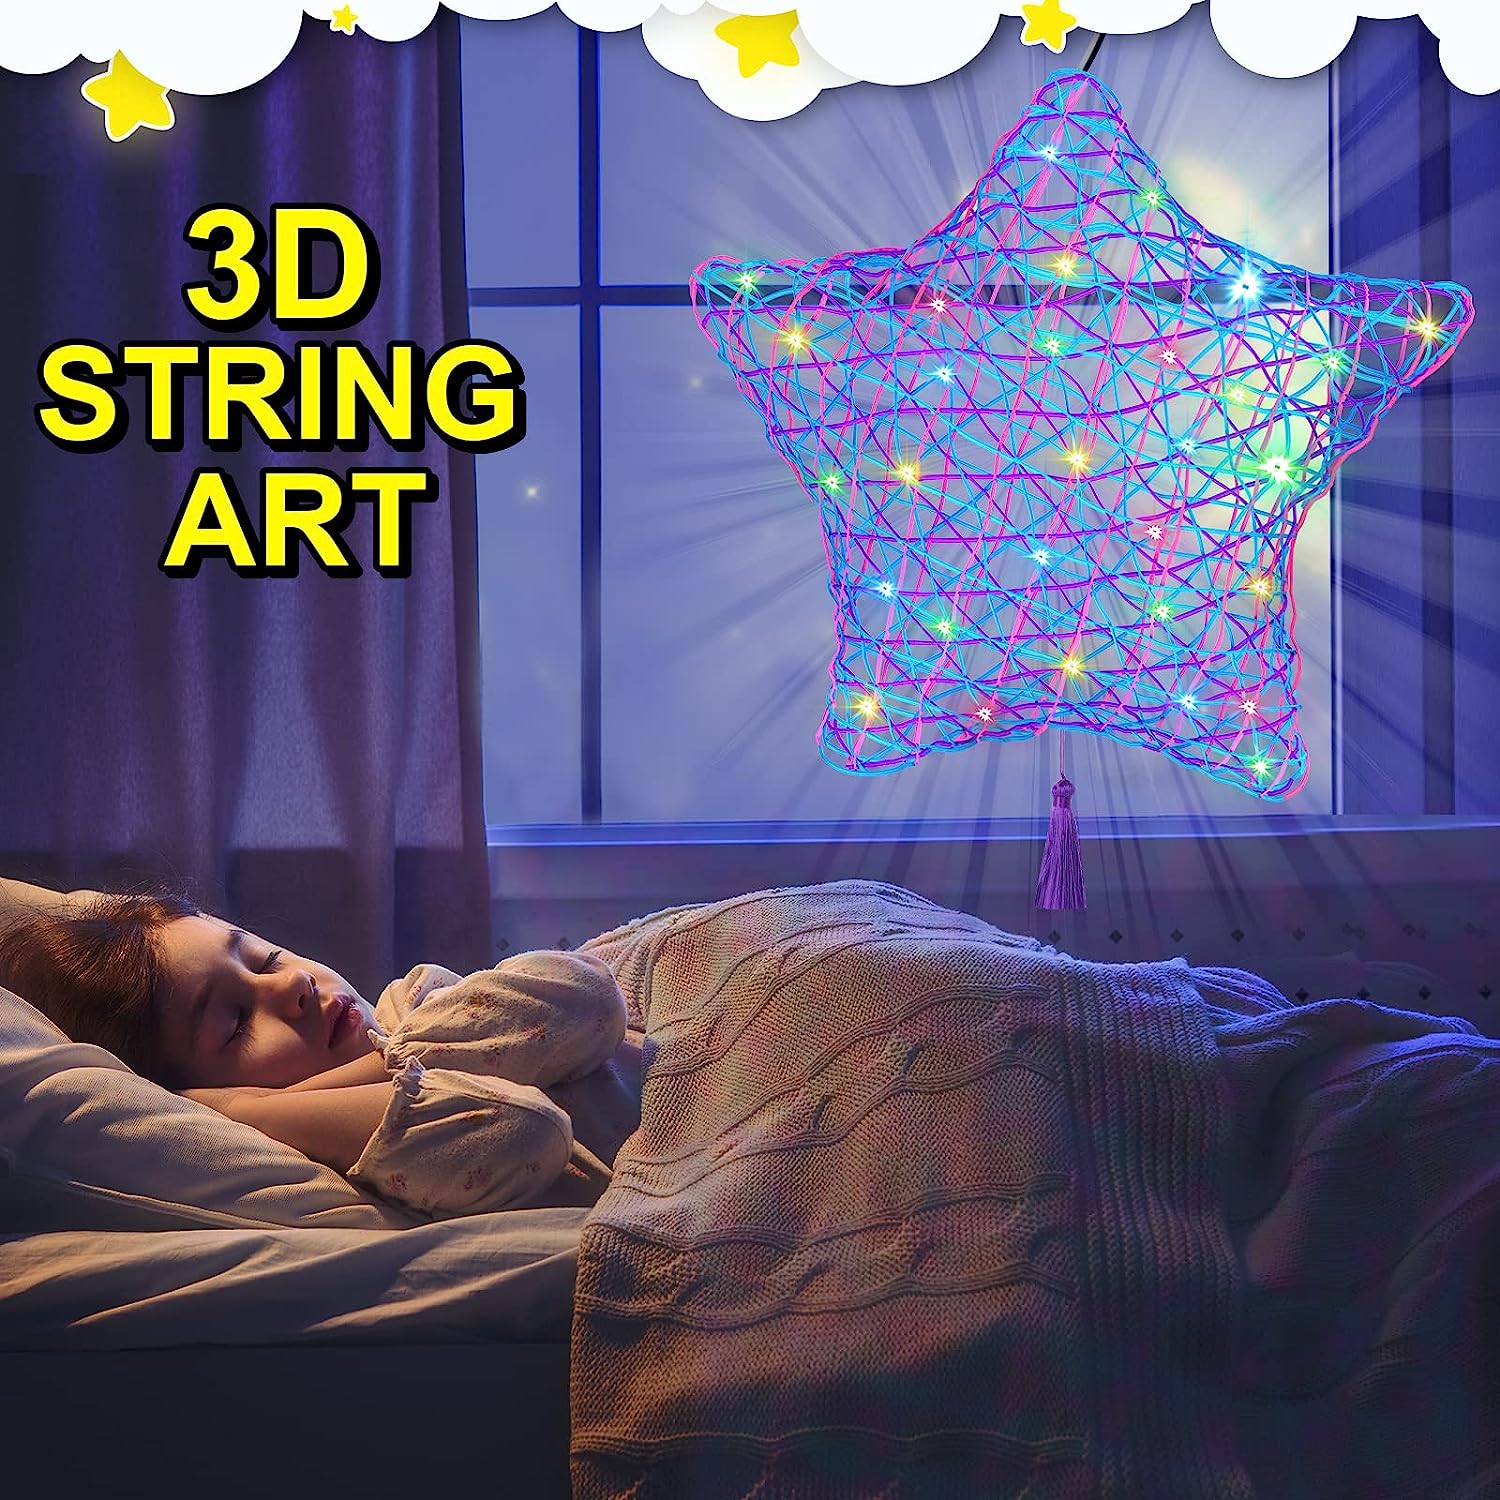  CREATIVEHOME Make a Glows Star Lantern with 30 Multi-Colored  LED Bulbs - Kids Gifts - 3D String Art Kit for Kids - DIY Arts & Craft Kits  - Crafts for Girls